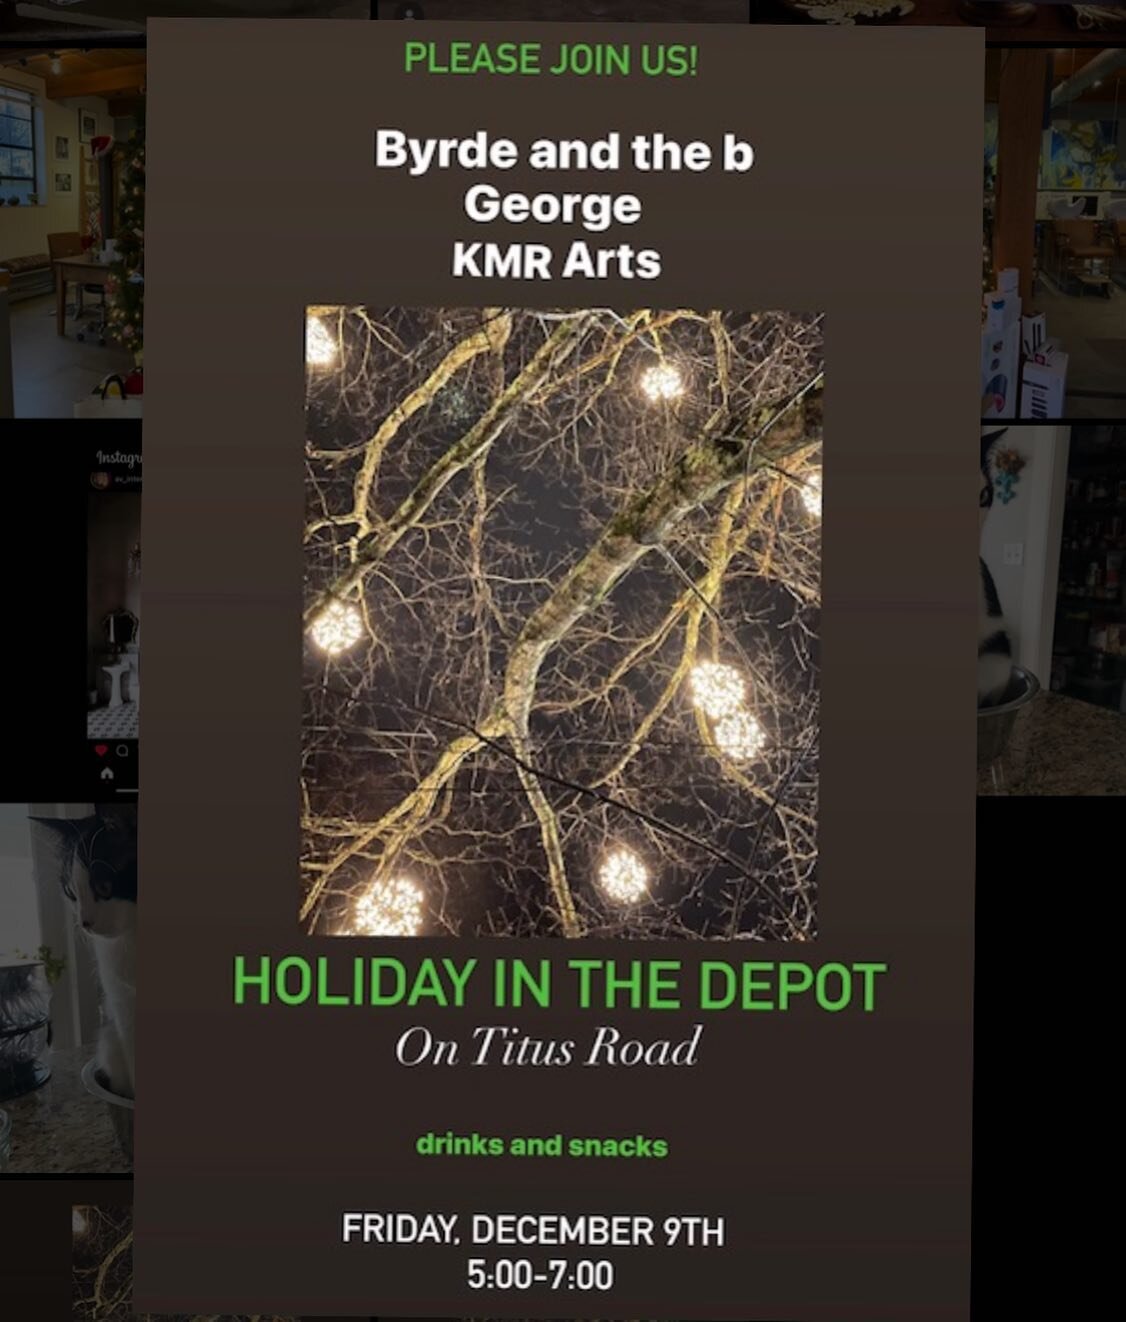 Please join us Fri Dec 9 from 5-7pm in The Depot to celebrate the holidays with a glass of cheer www.Byrdeand theb.com #byrdeandtheb #holidayinthedepot #explorewashingtonct #litchfieldcounty #holiday #cheer #spirit